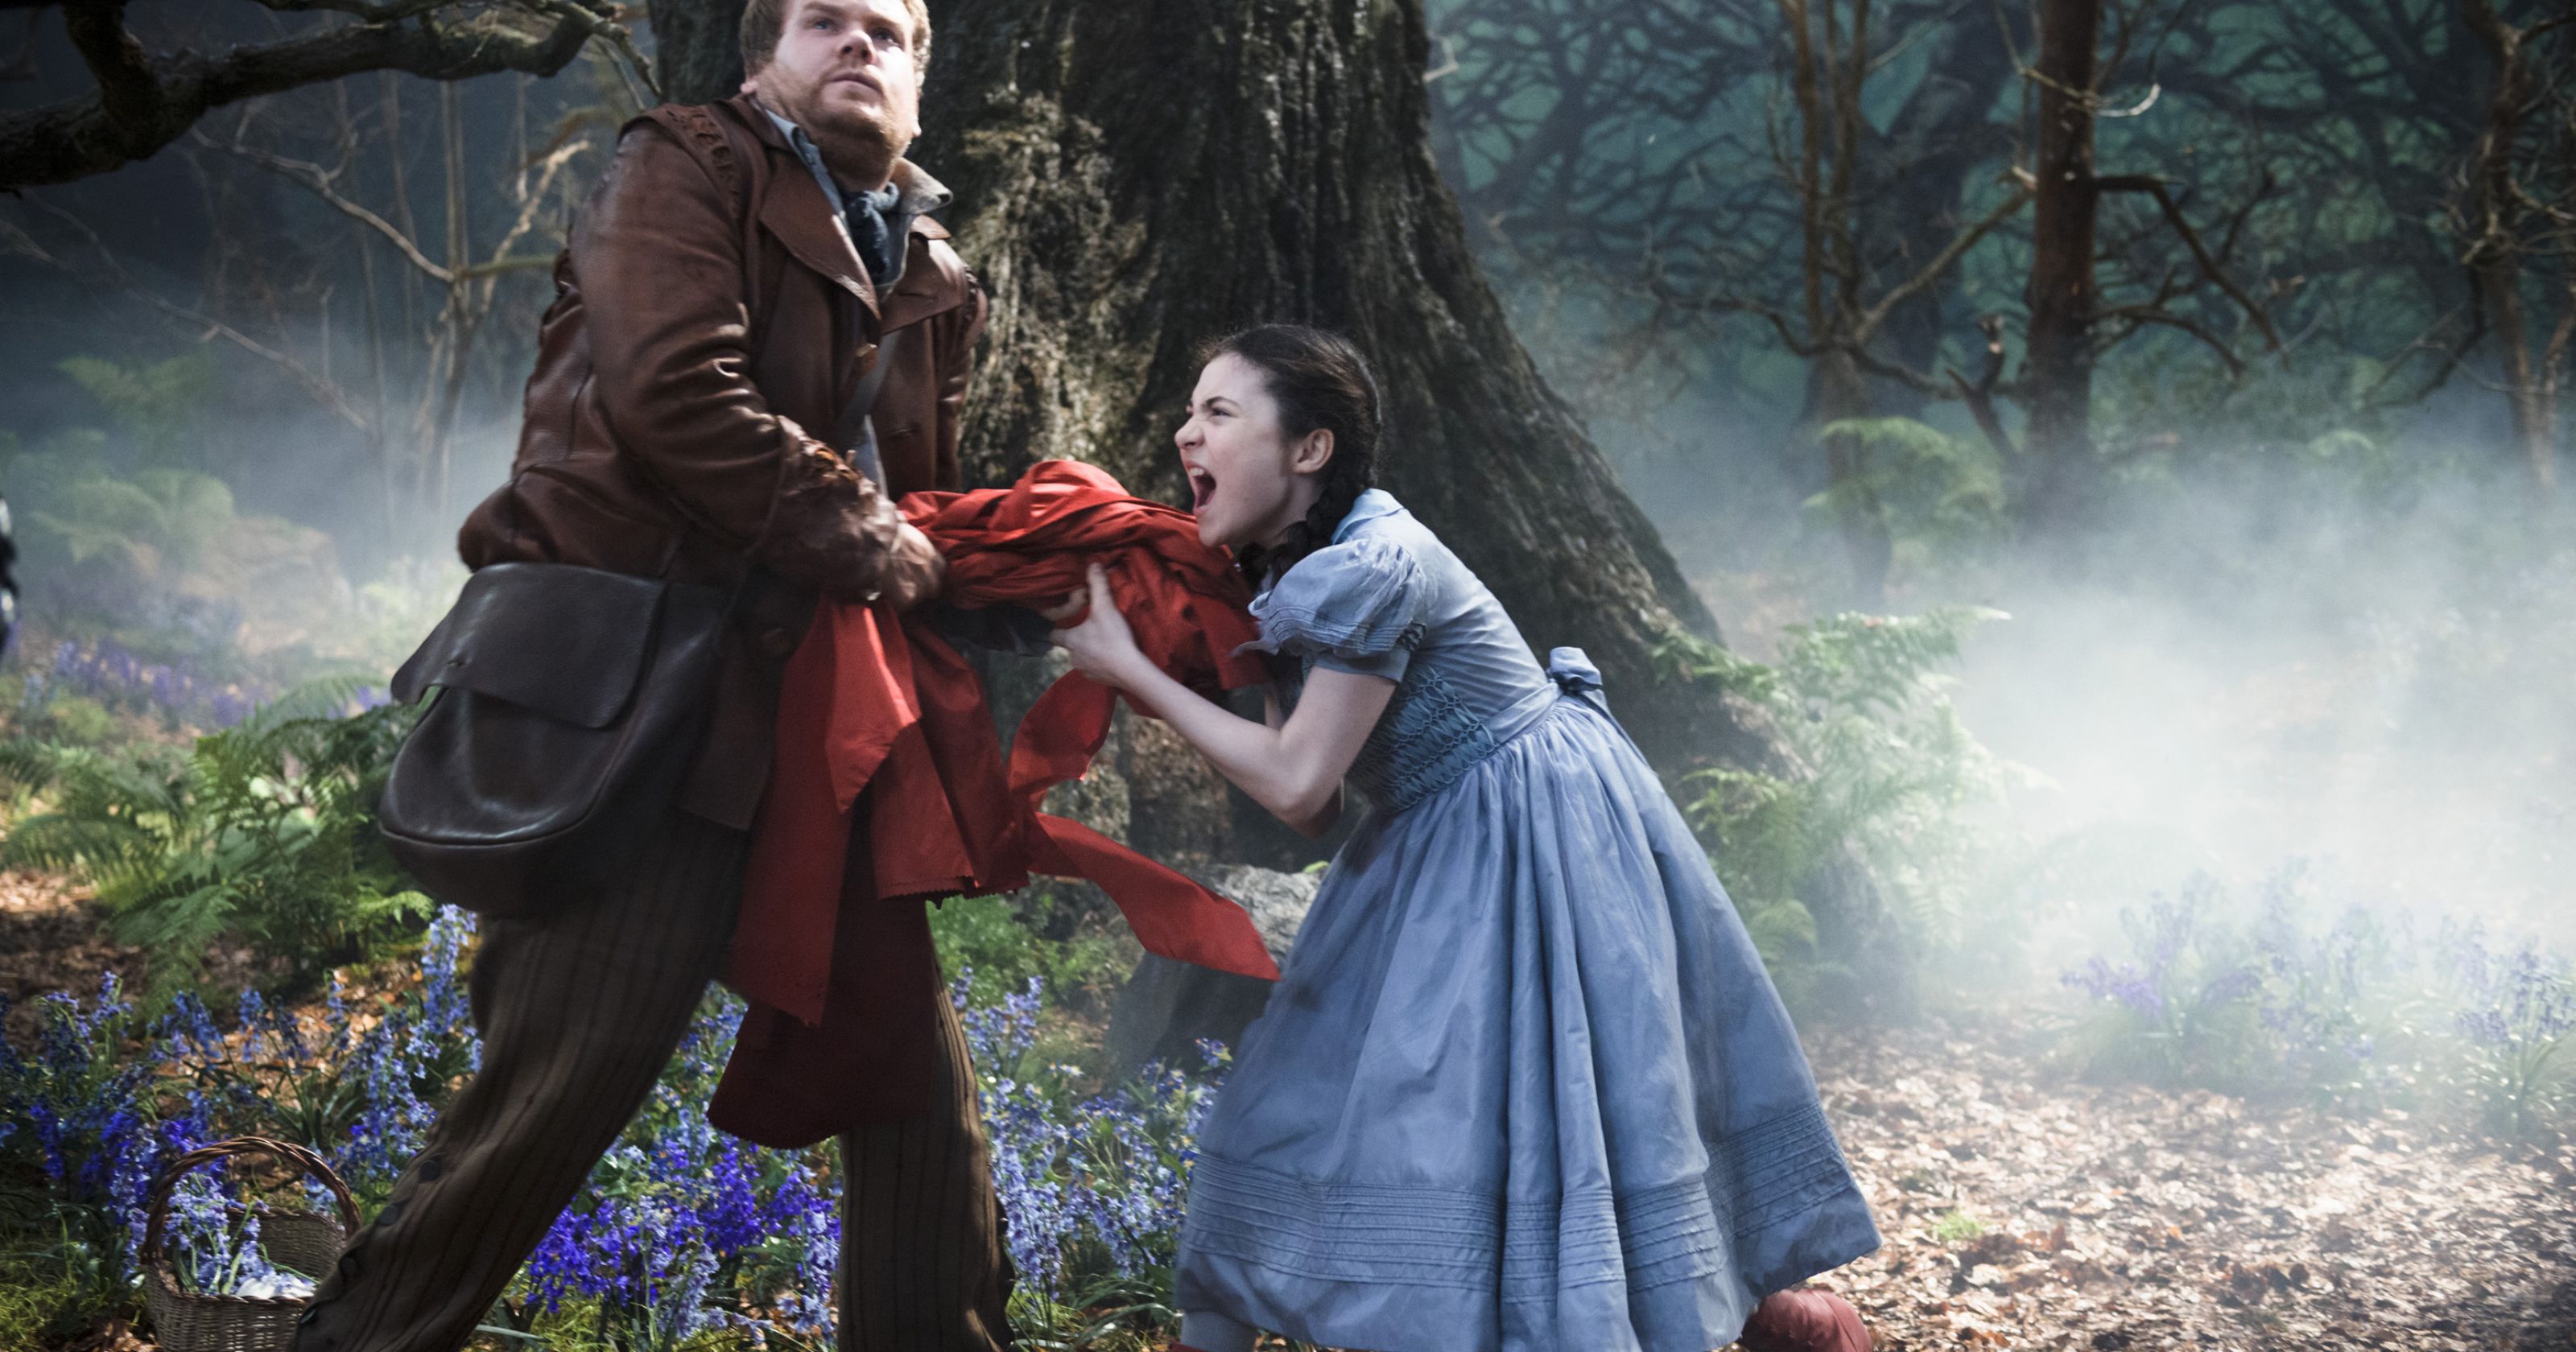 Into the Woods' is a stunning, if uneven, journey